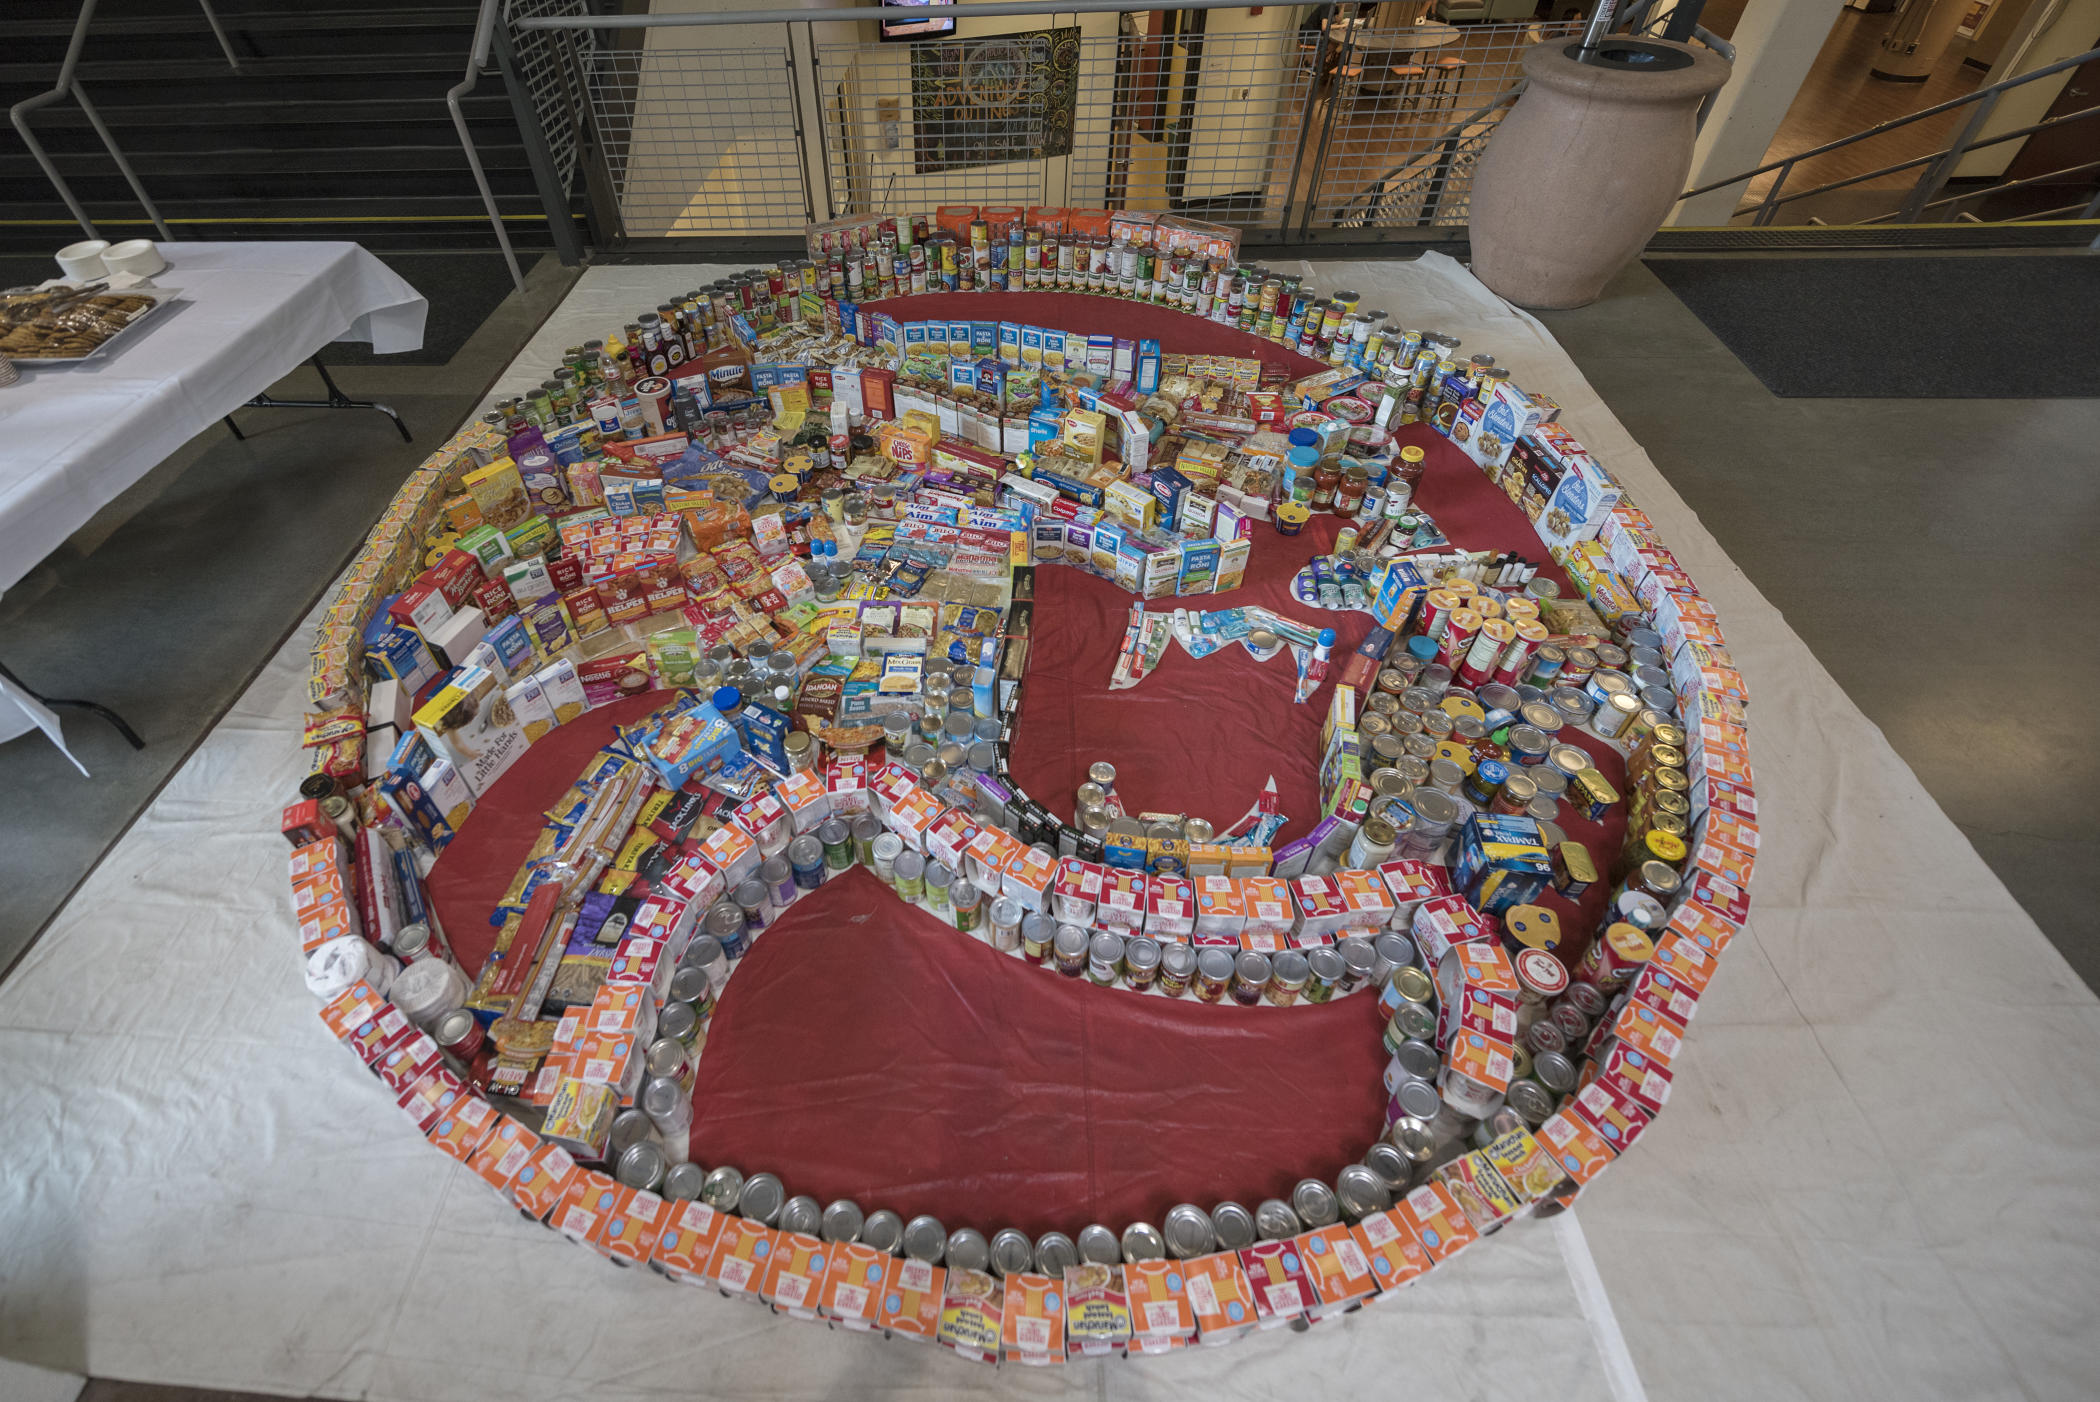 Wildcat logo shaped from donated cans